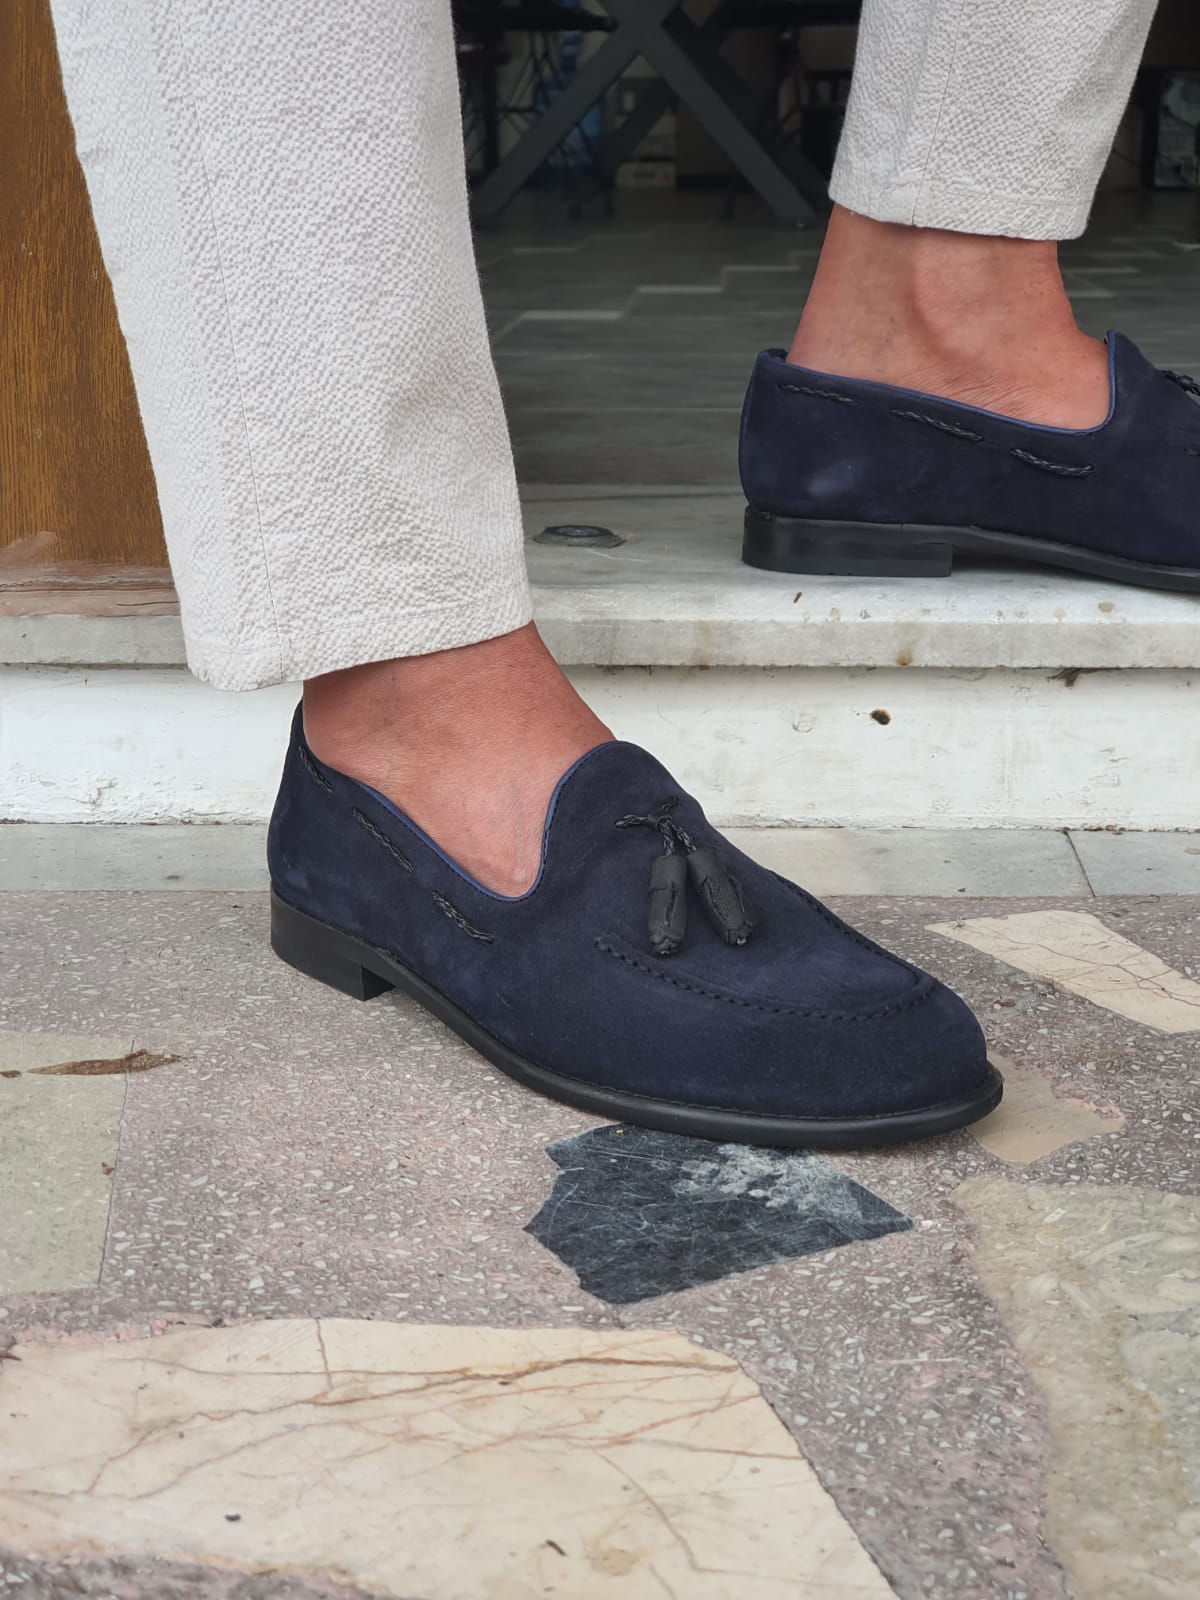 Blue Suede Shoes Styling